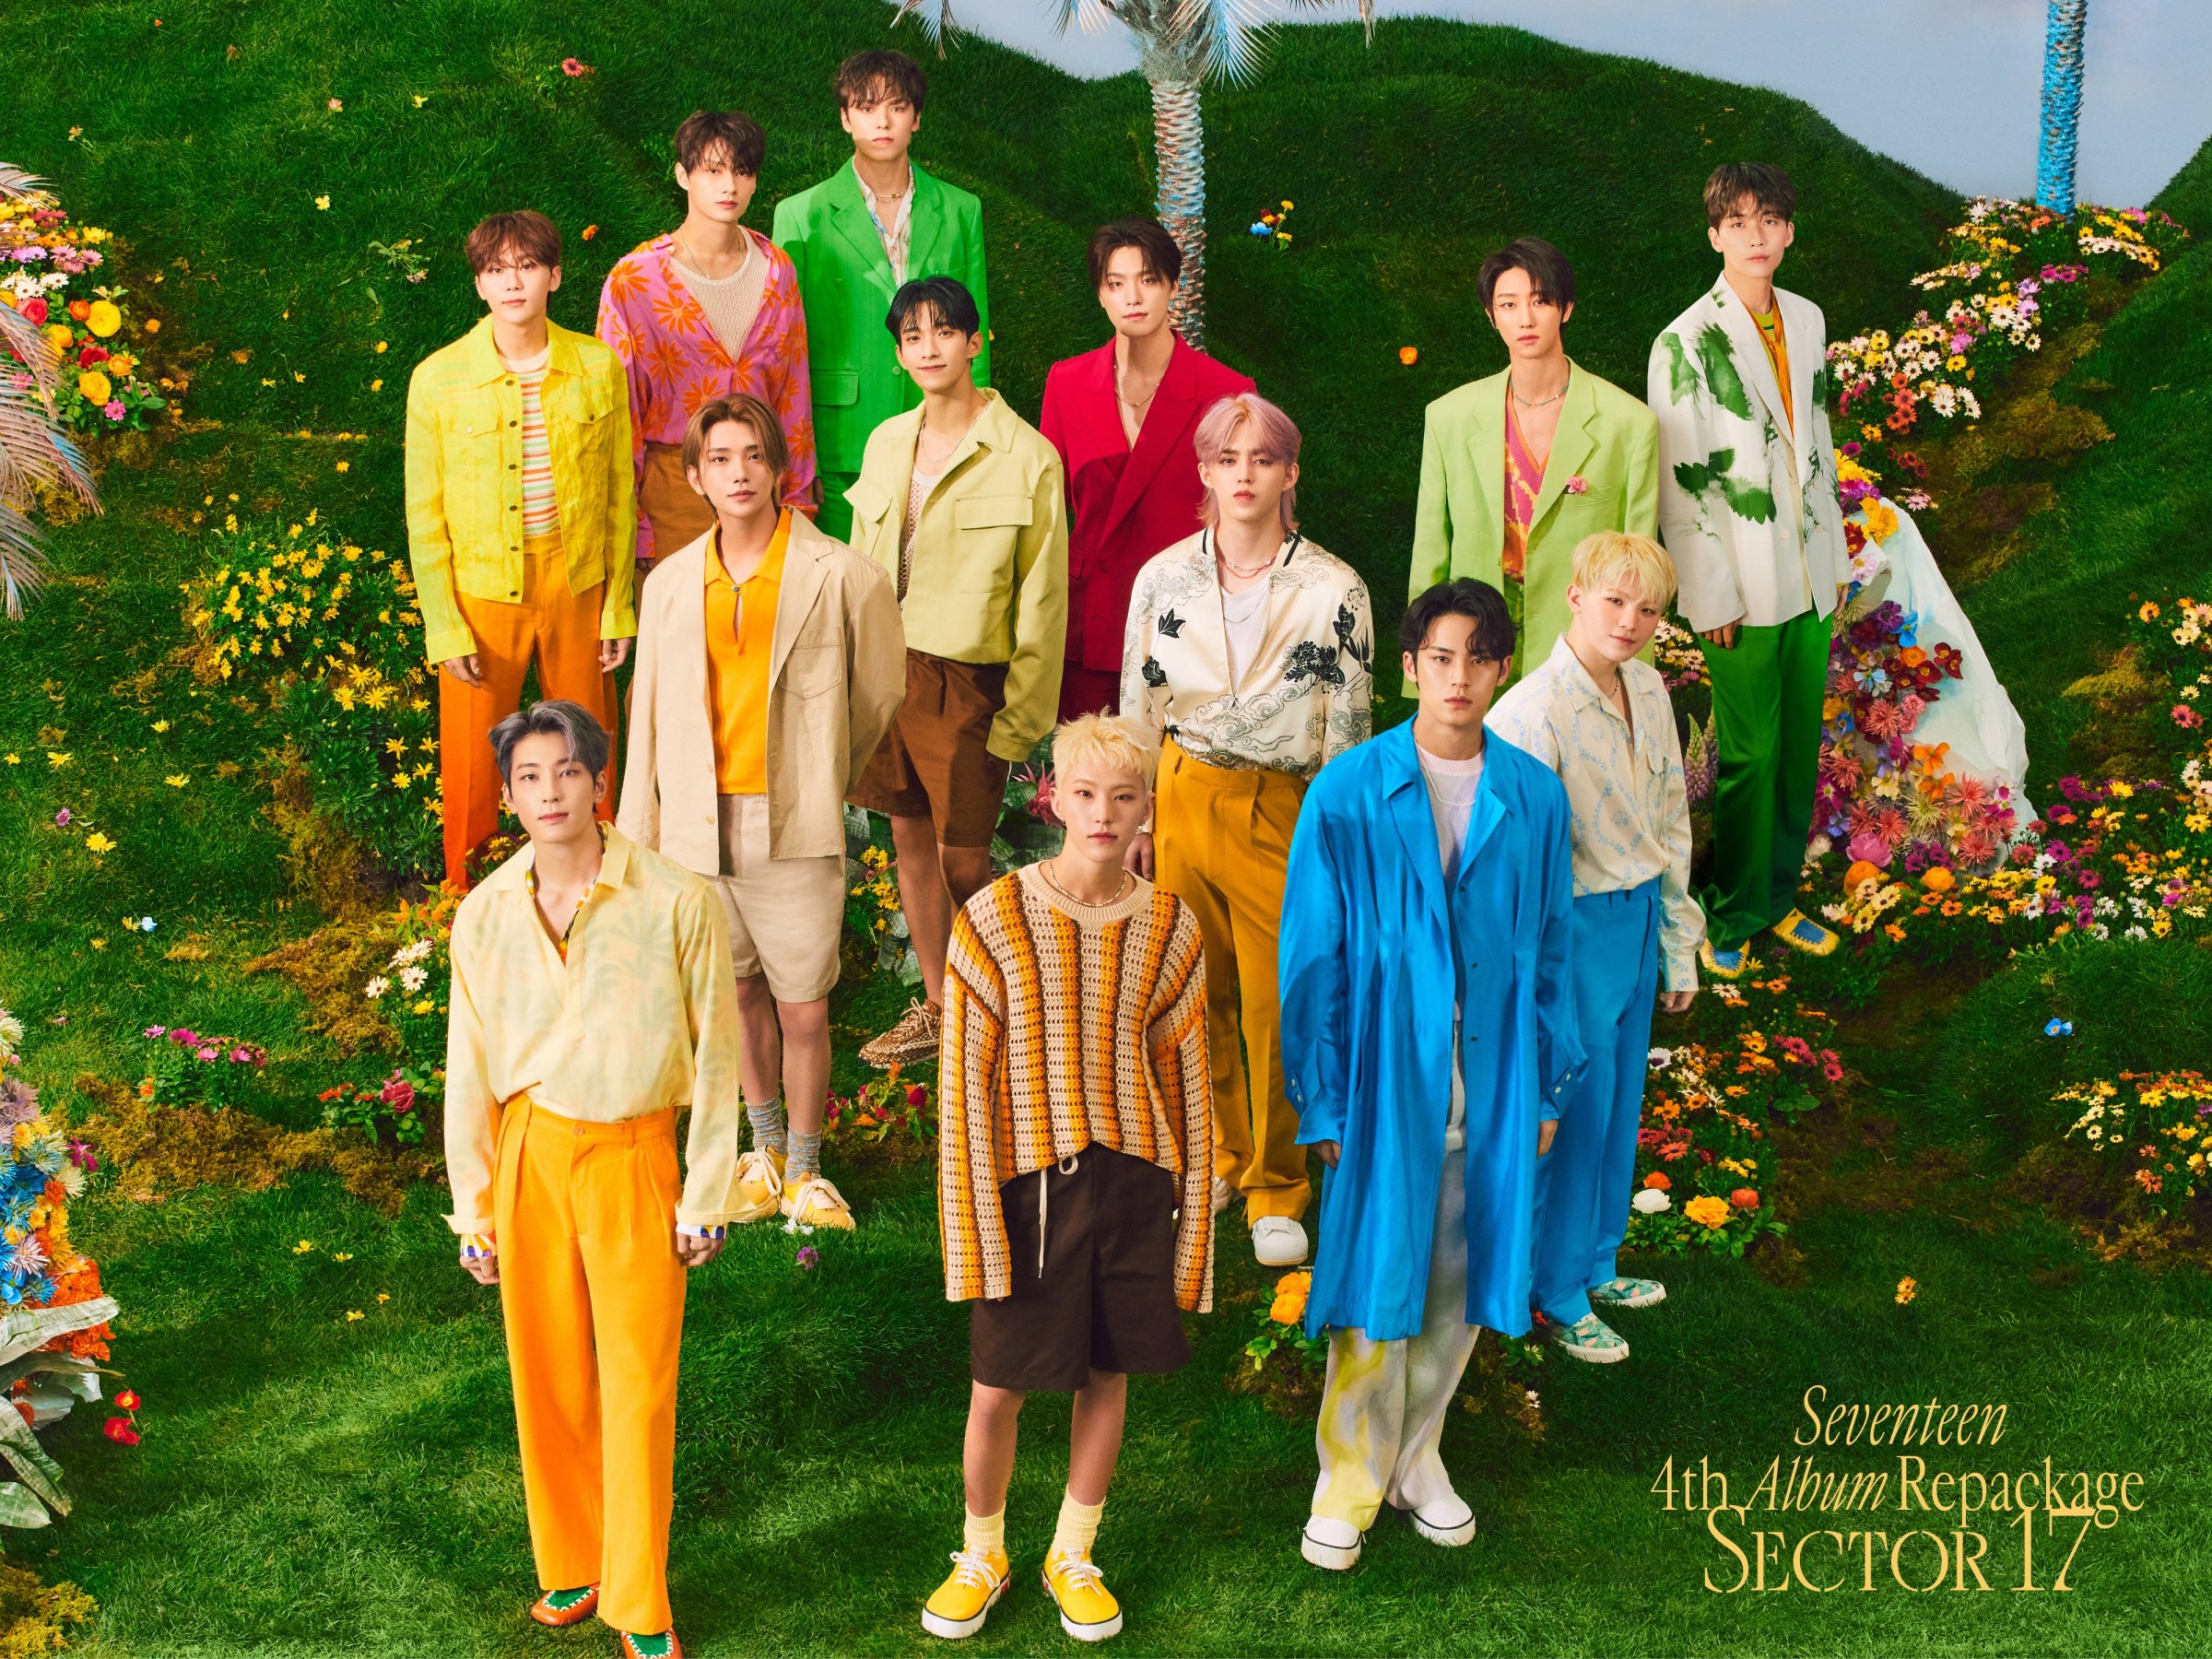 Seventeen signals a 'New Beginning' in teaser image for 4th repackaged album 'Sector 17'